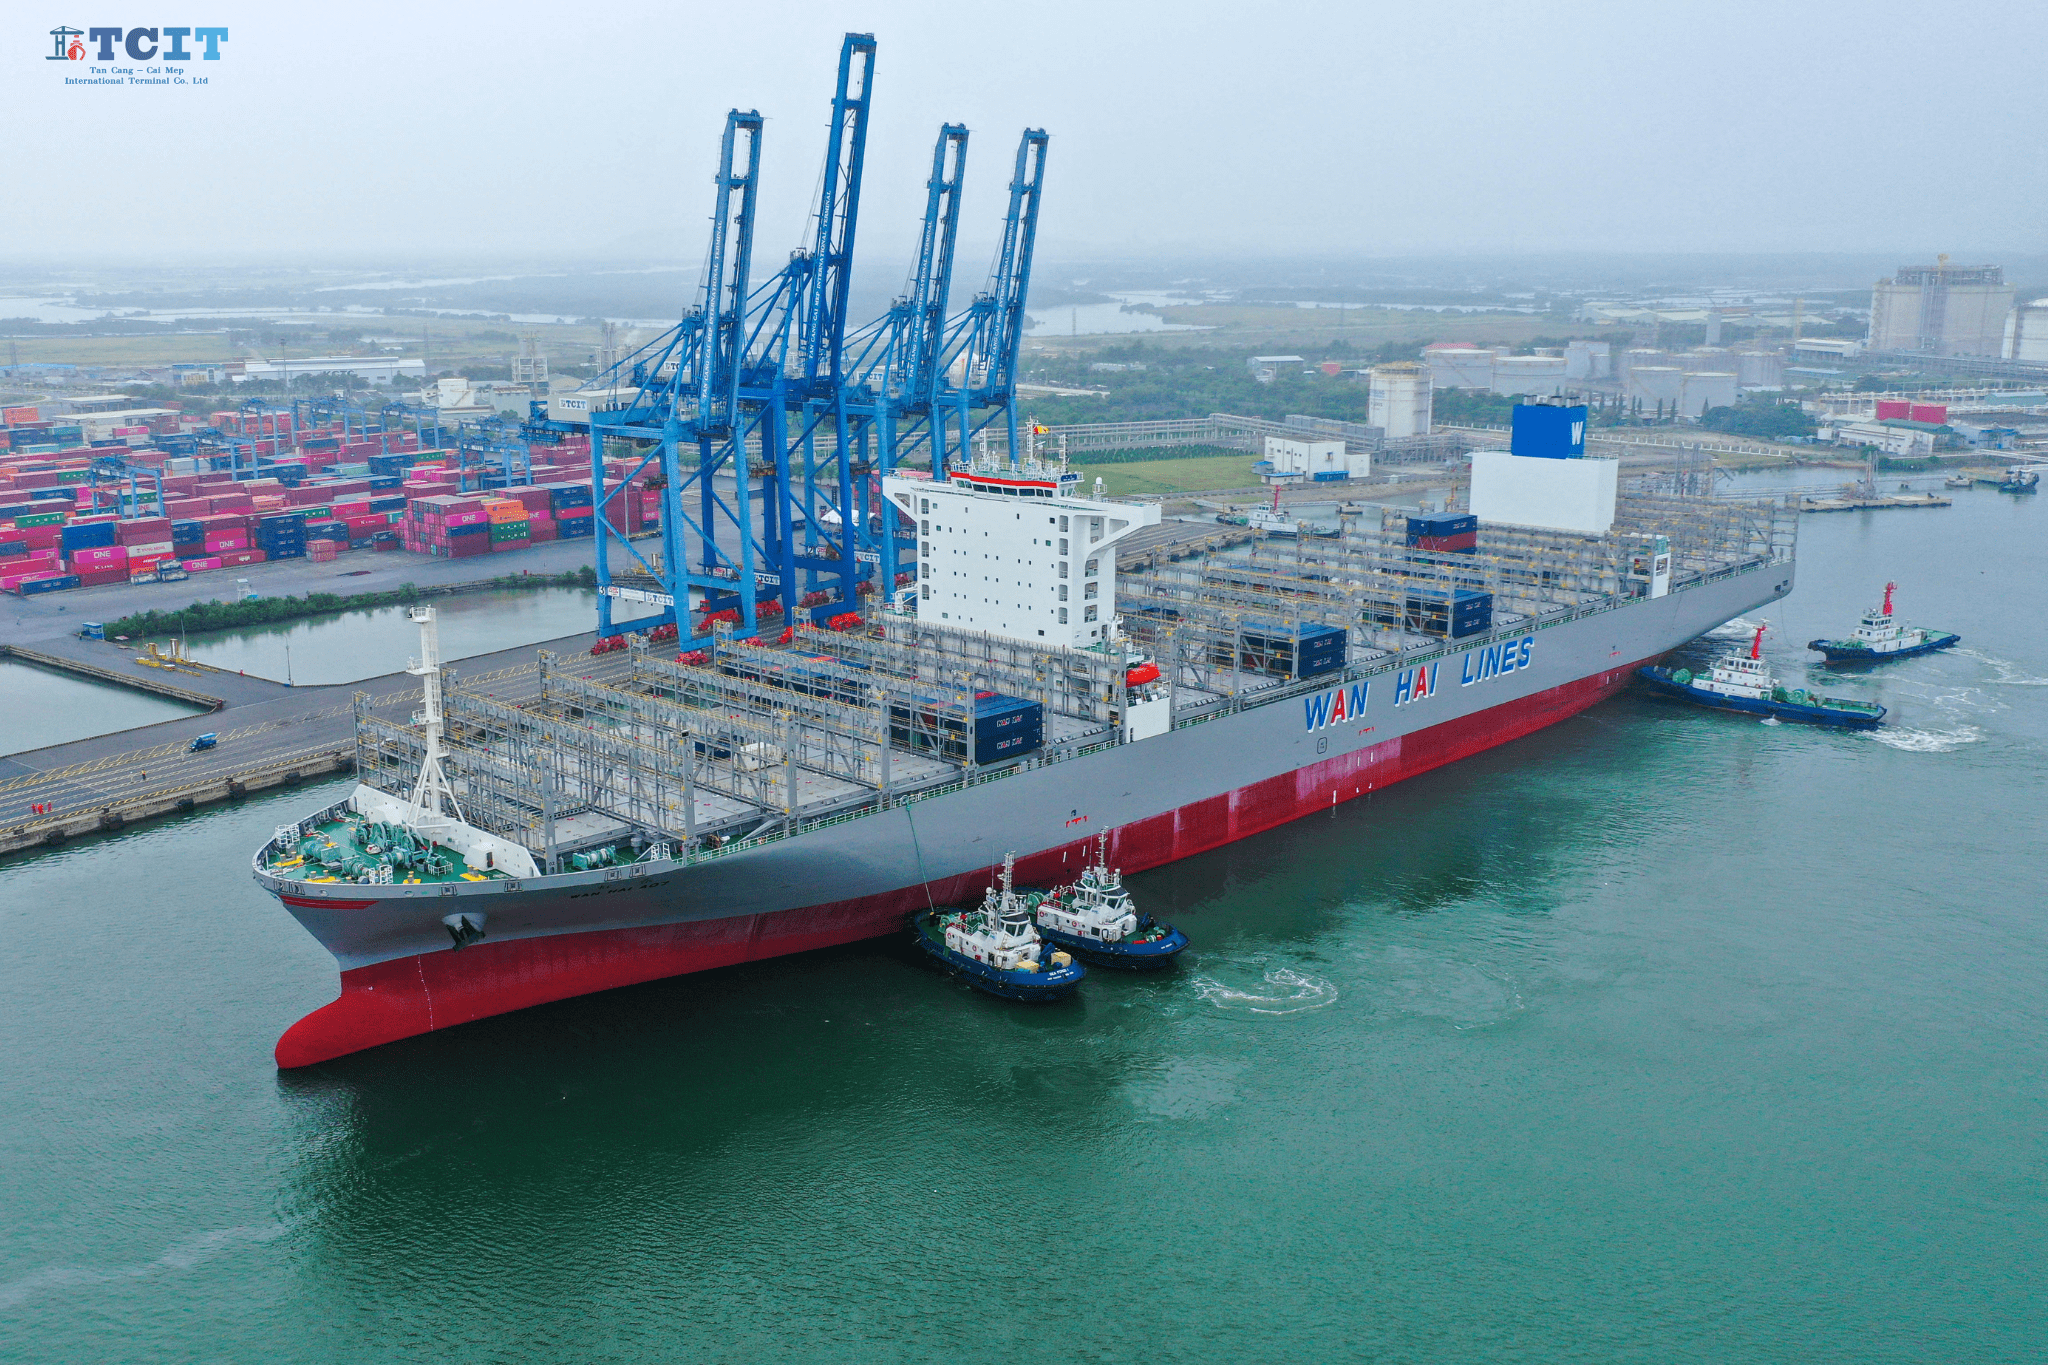 WARMLY WELCOME THE LARGEST CONTAINER VESSEL OF WAN HAI LINES TO EVER CALL AT TCIT.